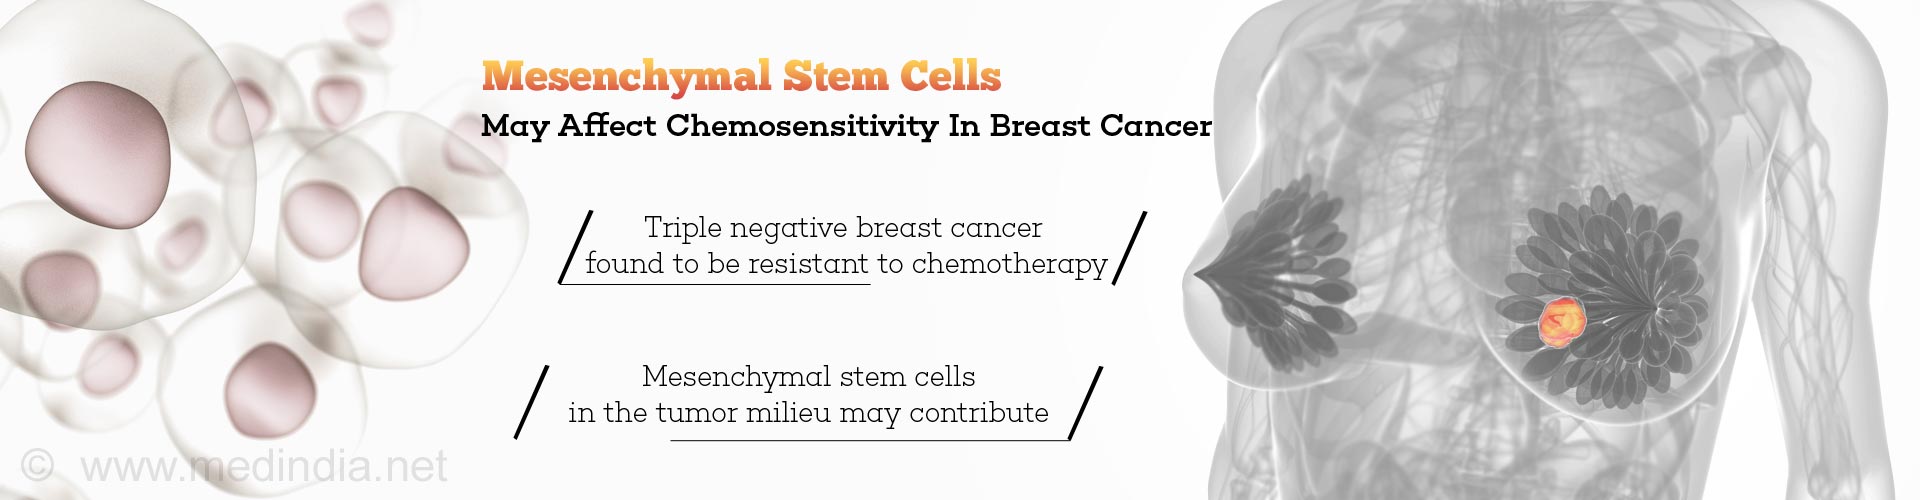 Mesenchymal Stem Cells May Affect Chemosensitivity in Breast Cancer
- Triple negative breast cancer found to be resistant to chemotherapy
- Mesenchymal stem cells in the tumor milieu may contribute
